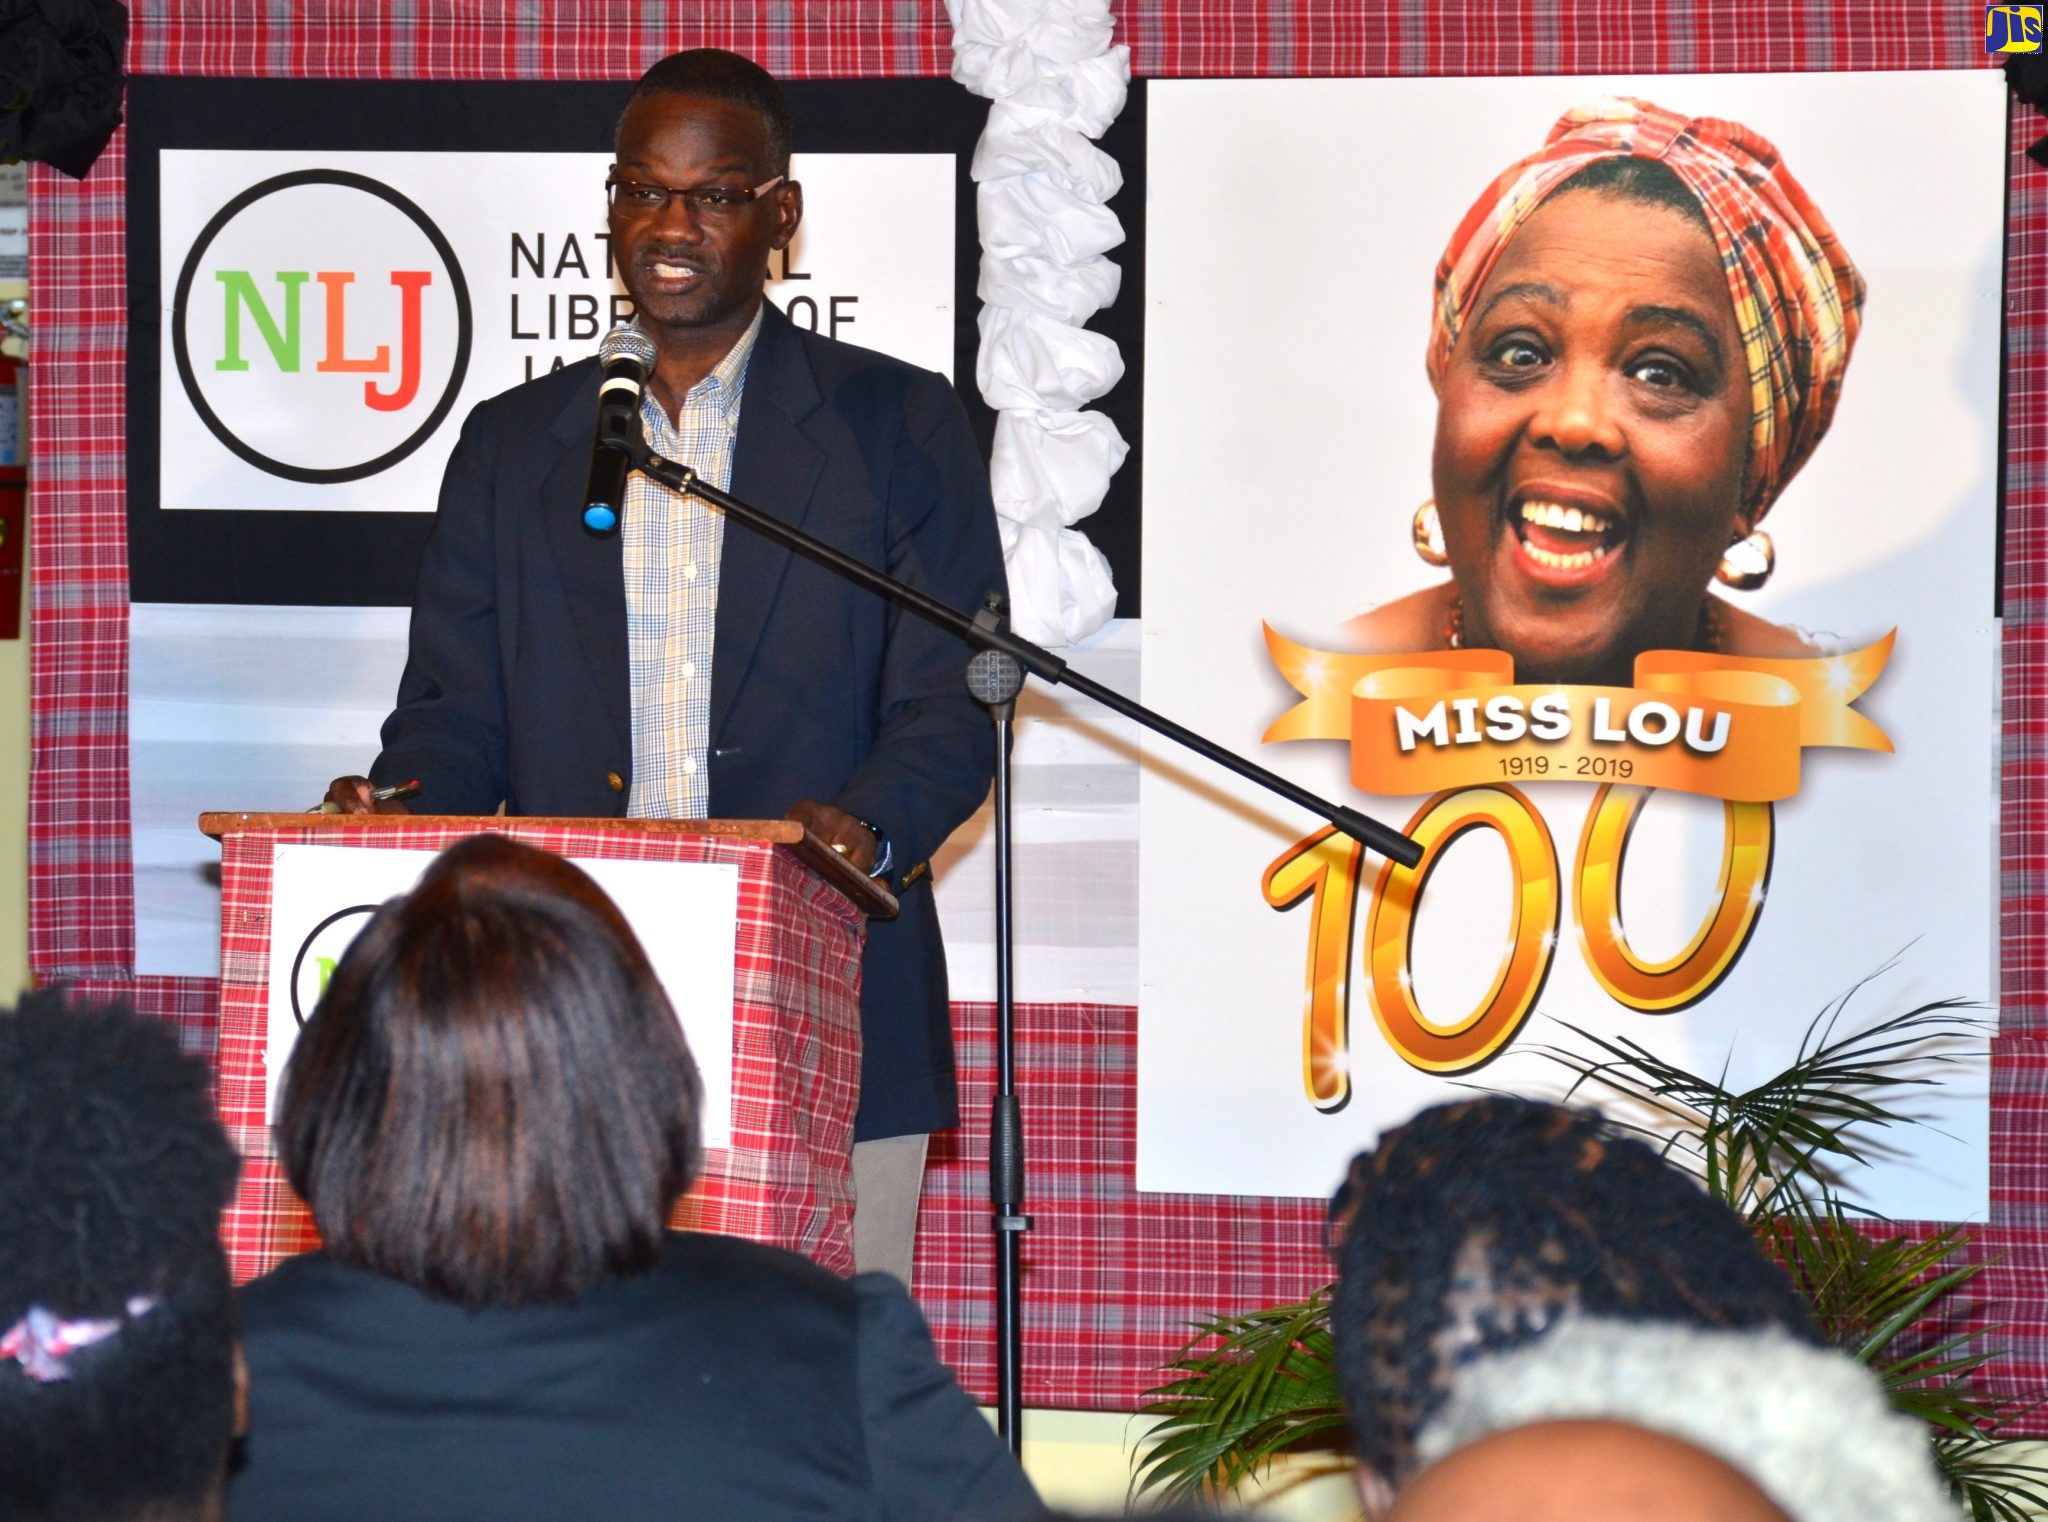 Miss Lou - A Tribute to Jamaica's Iconic Poet & Activist